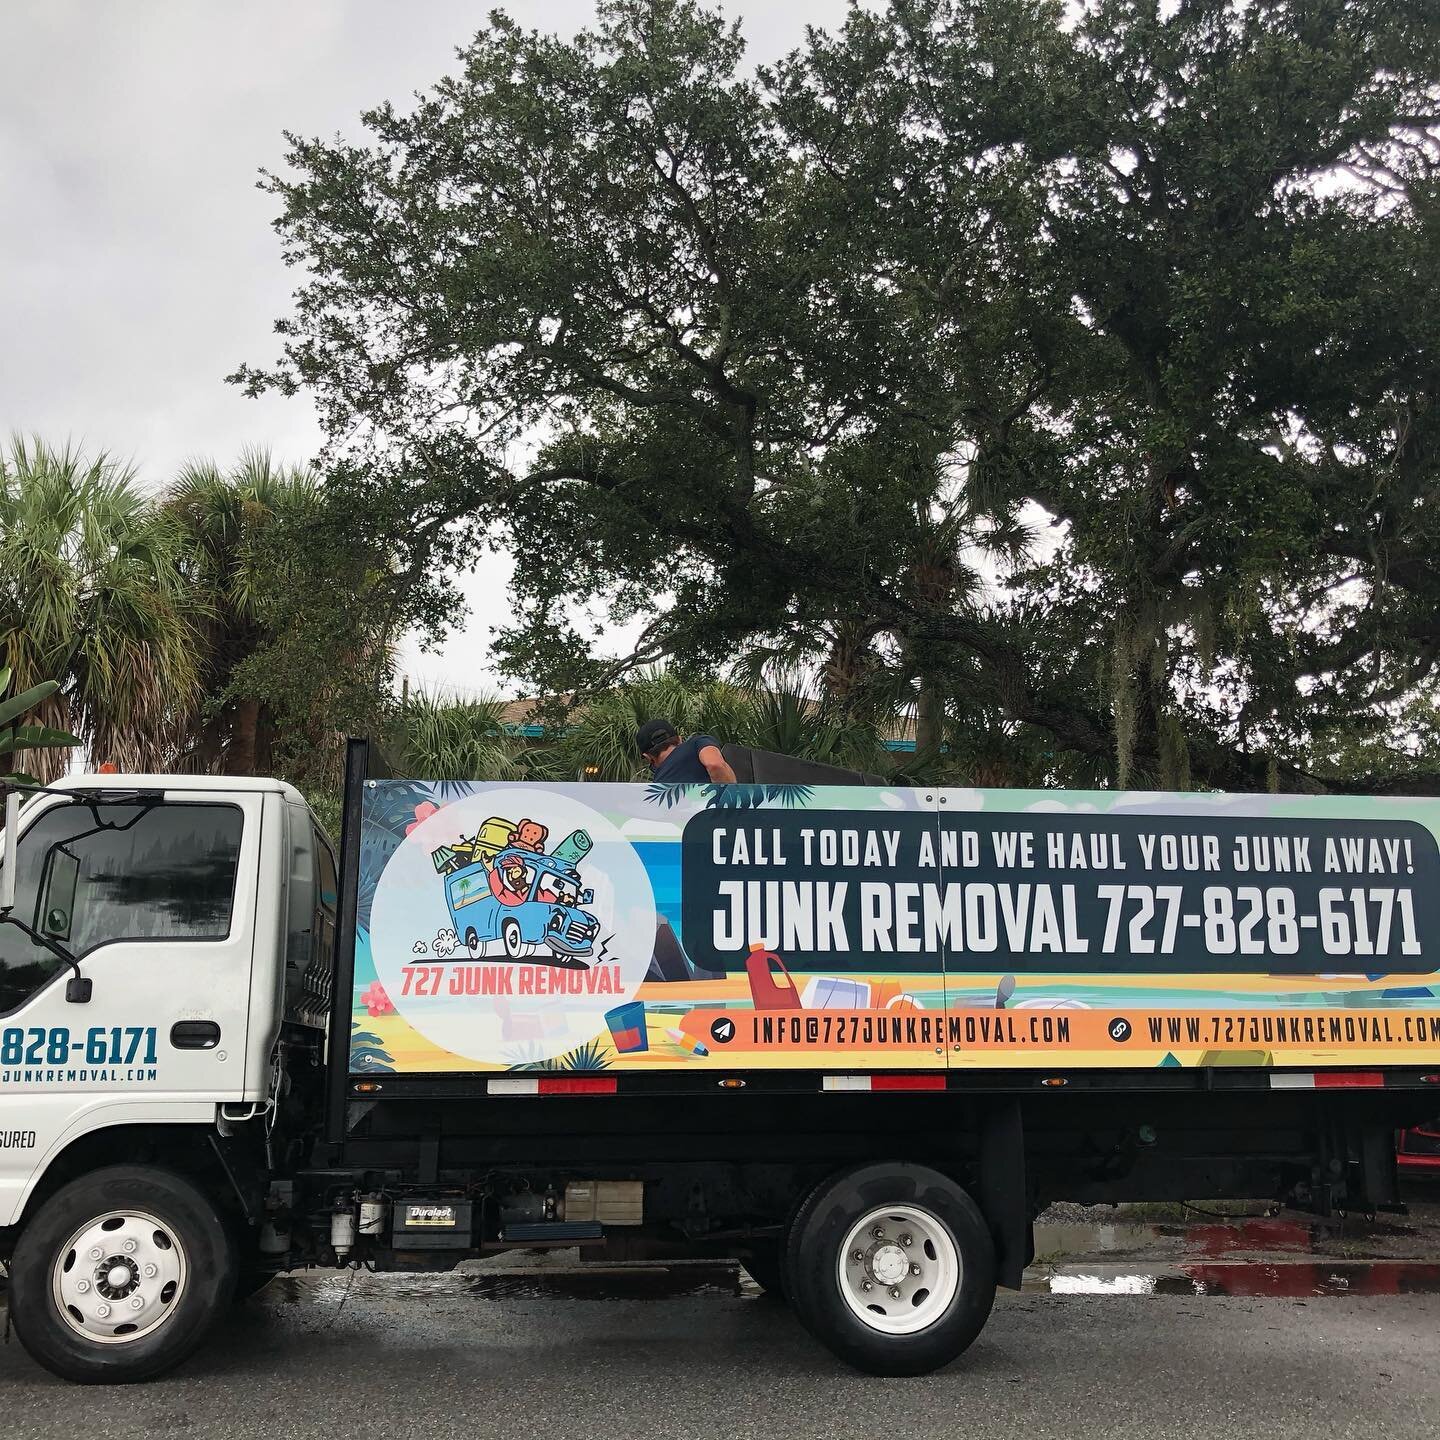 When you move take your friends / family with you, but leave the junk for us!
&bull;
📲 Call For Instant Quote!
(727) 828-6171
&bull;
Call today for a FREE quote to haul your junk. Services starting as low as $99 including dump fees.
&bull;
What&rsqu